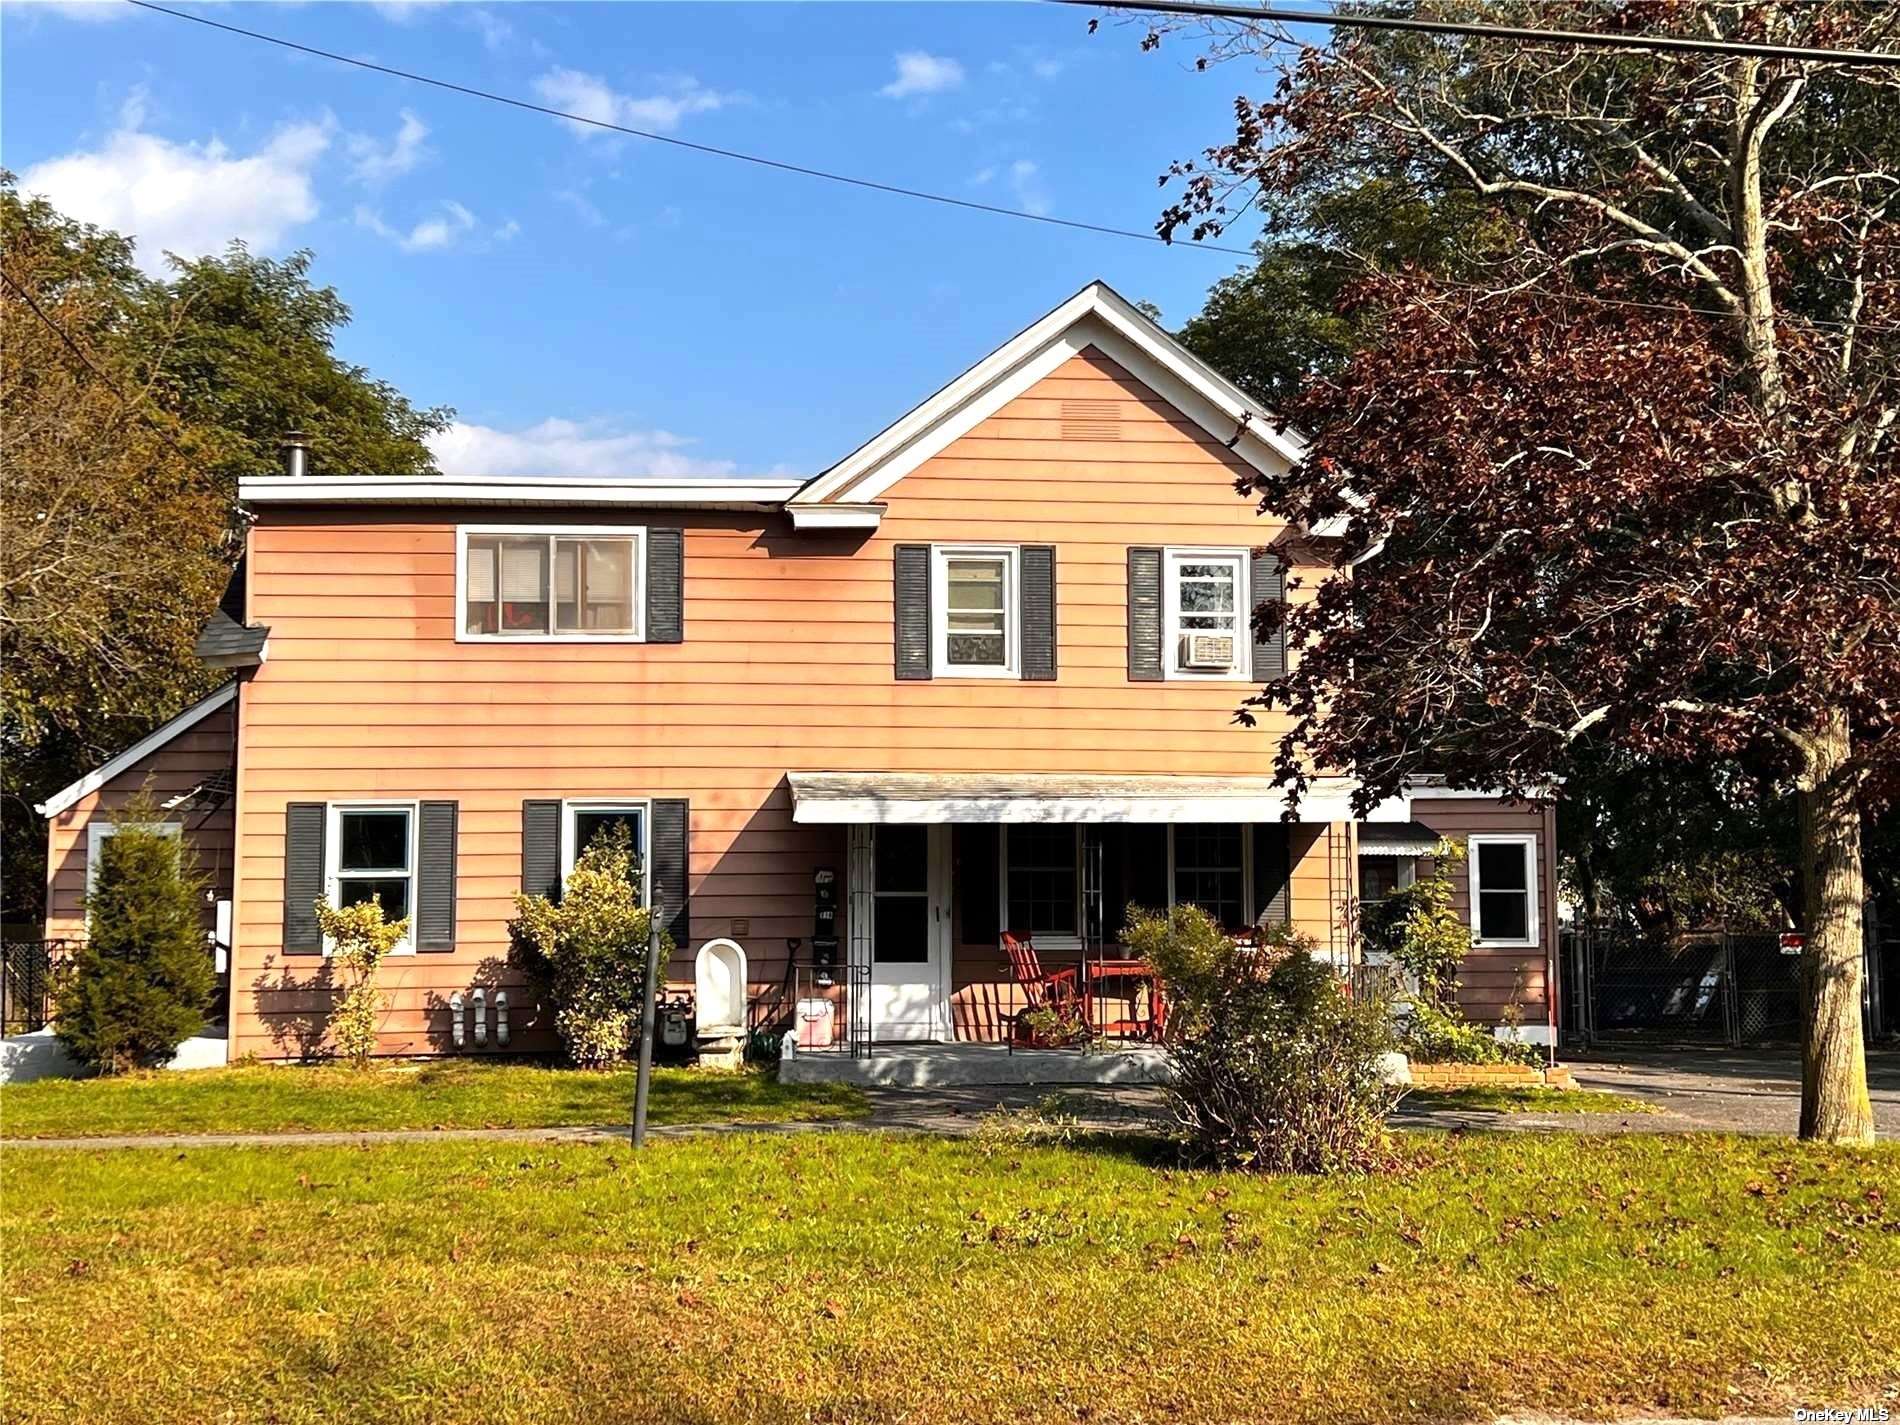 View West Sayville, NY 11796 multi-family property